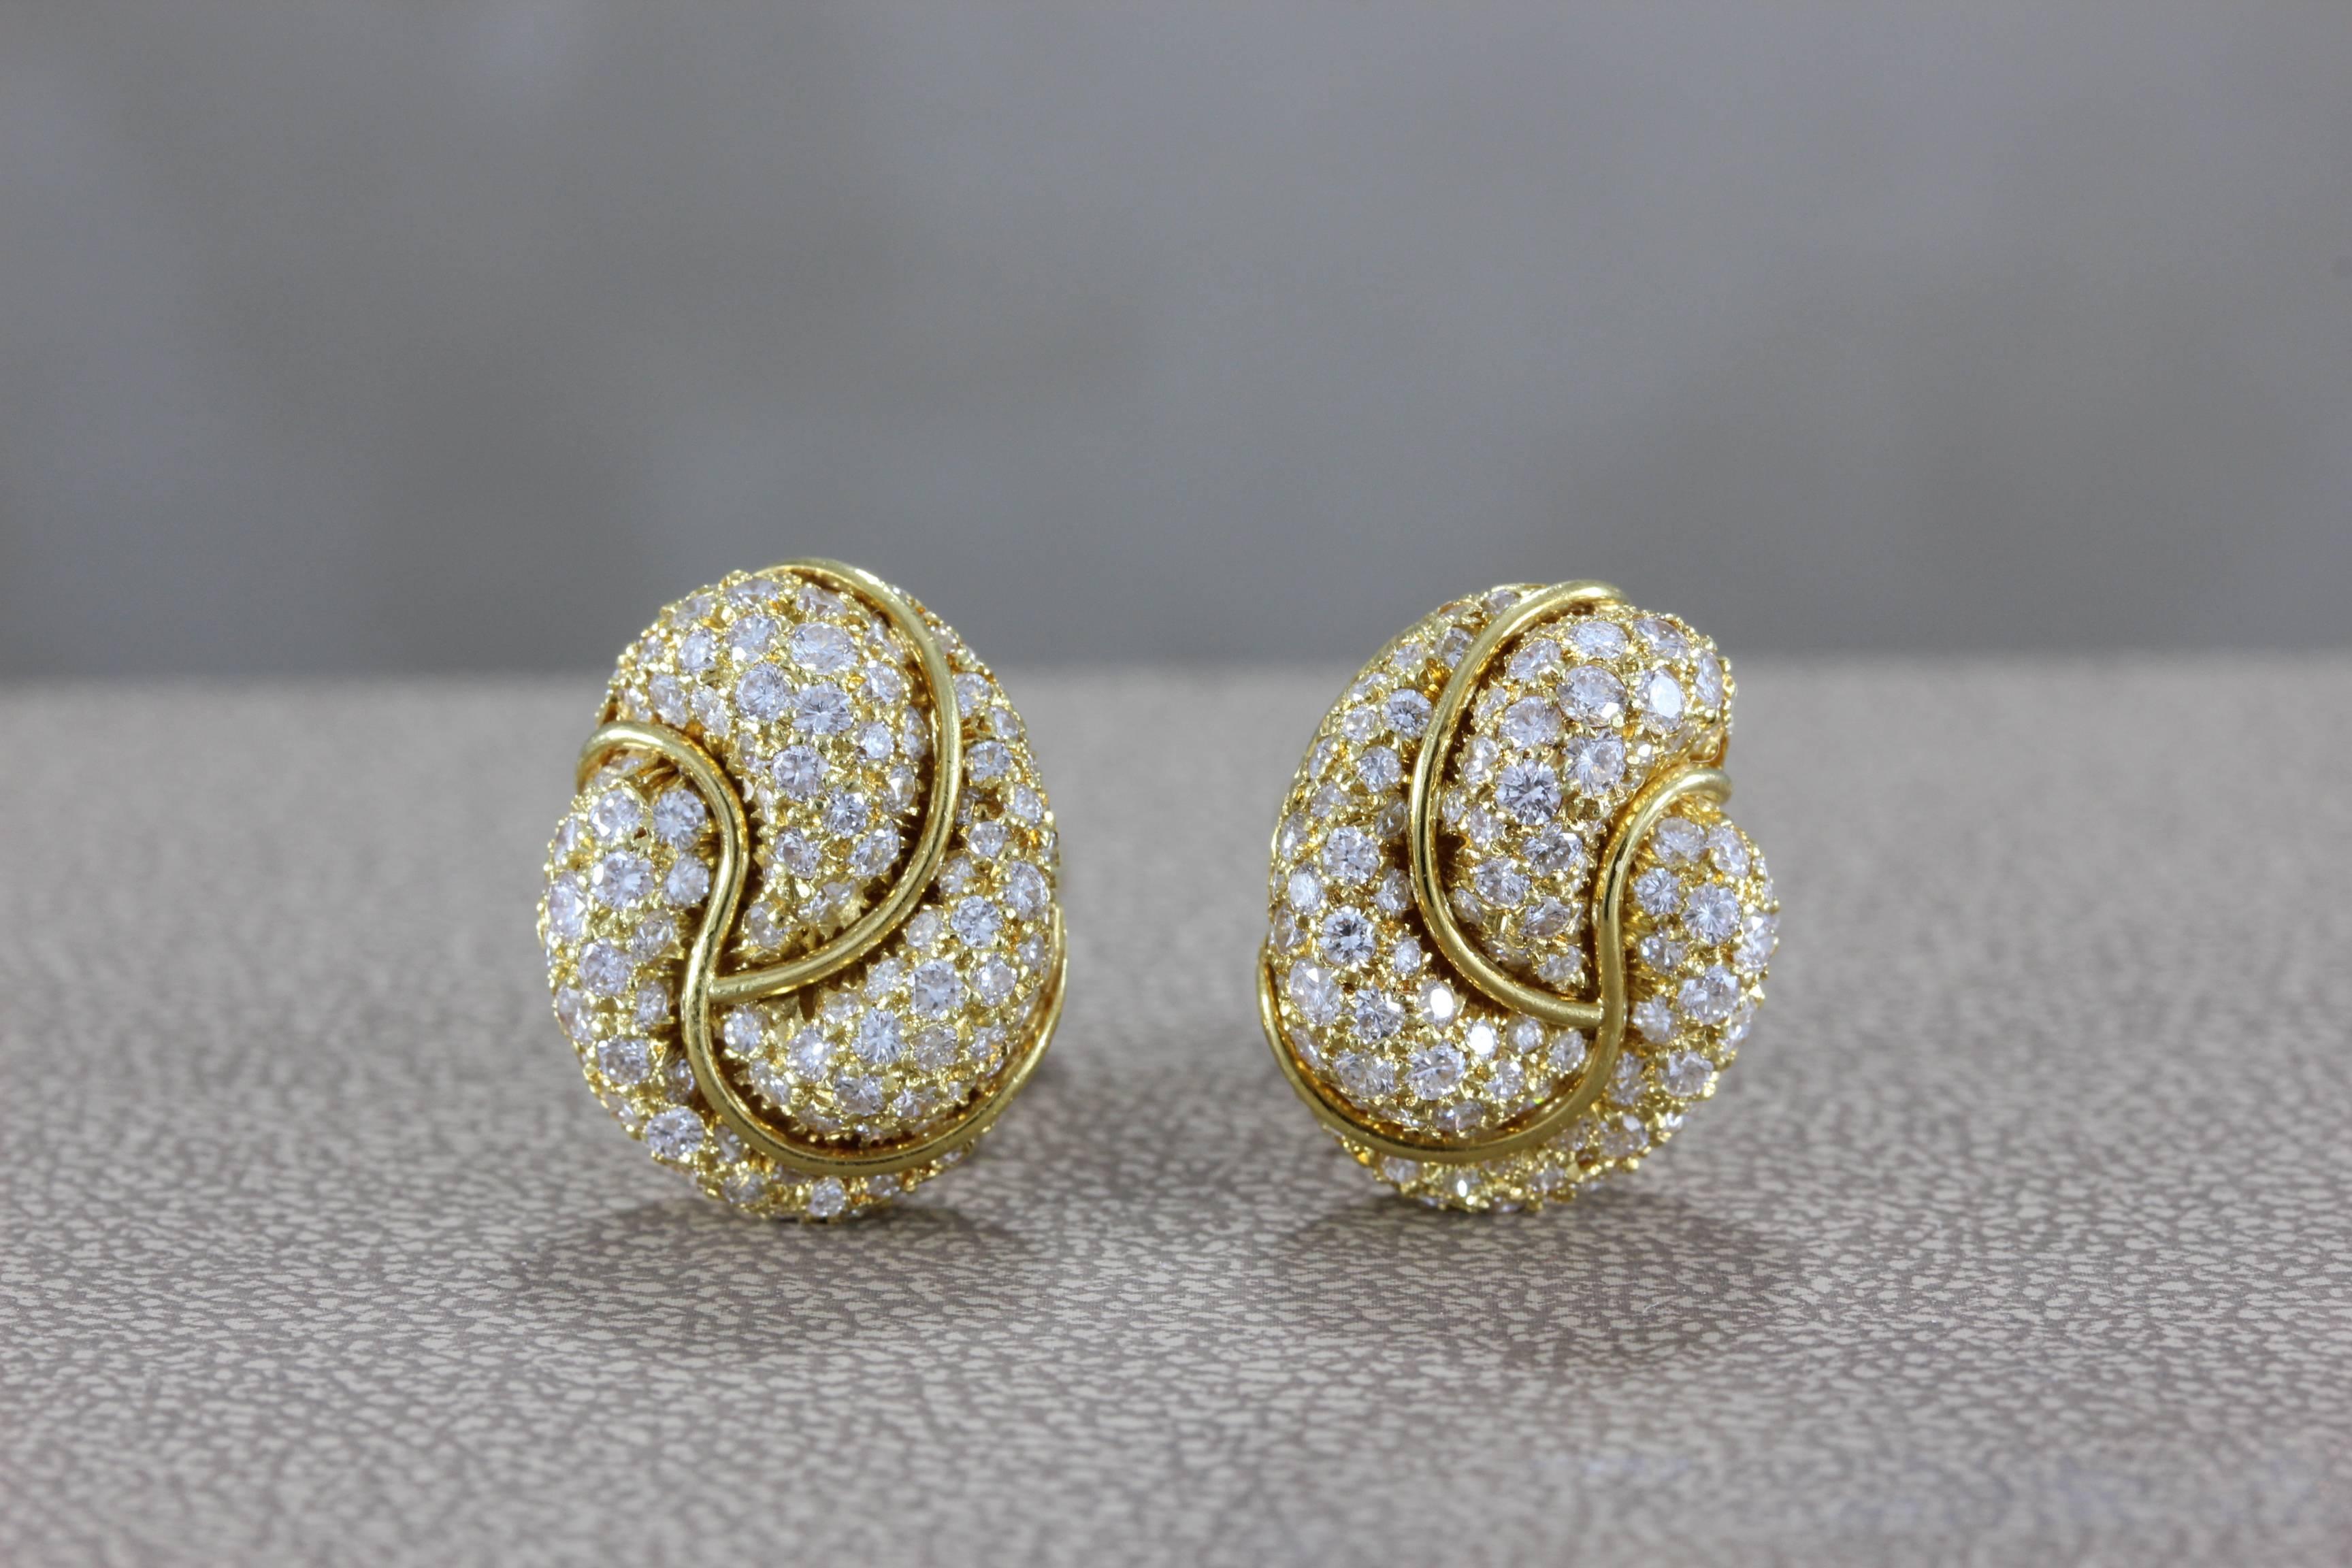 A classic Henry Dunay piece, these ear clips feature approximately 3 carats of round cut VS diamonds set in 18K yellow gold in a spiral swirl design. A fine American jewelry house, these Henry Dunay earrings are a timeless classic. 

Dimensions: